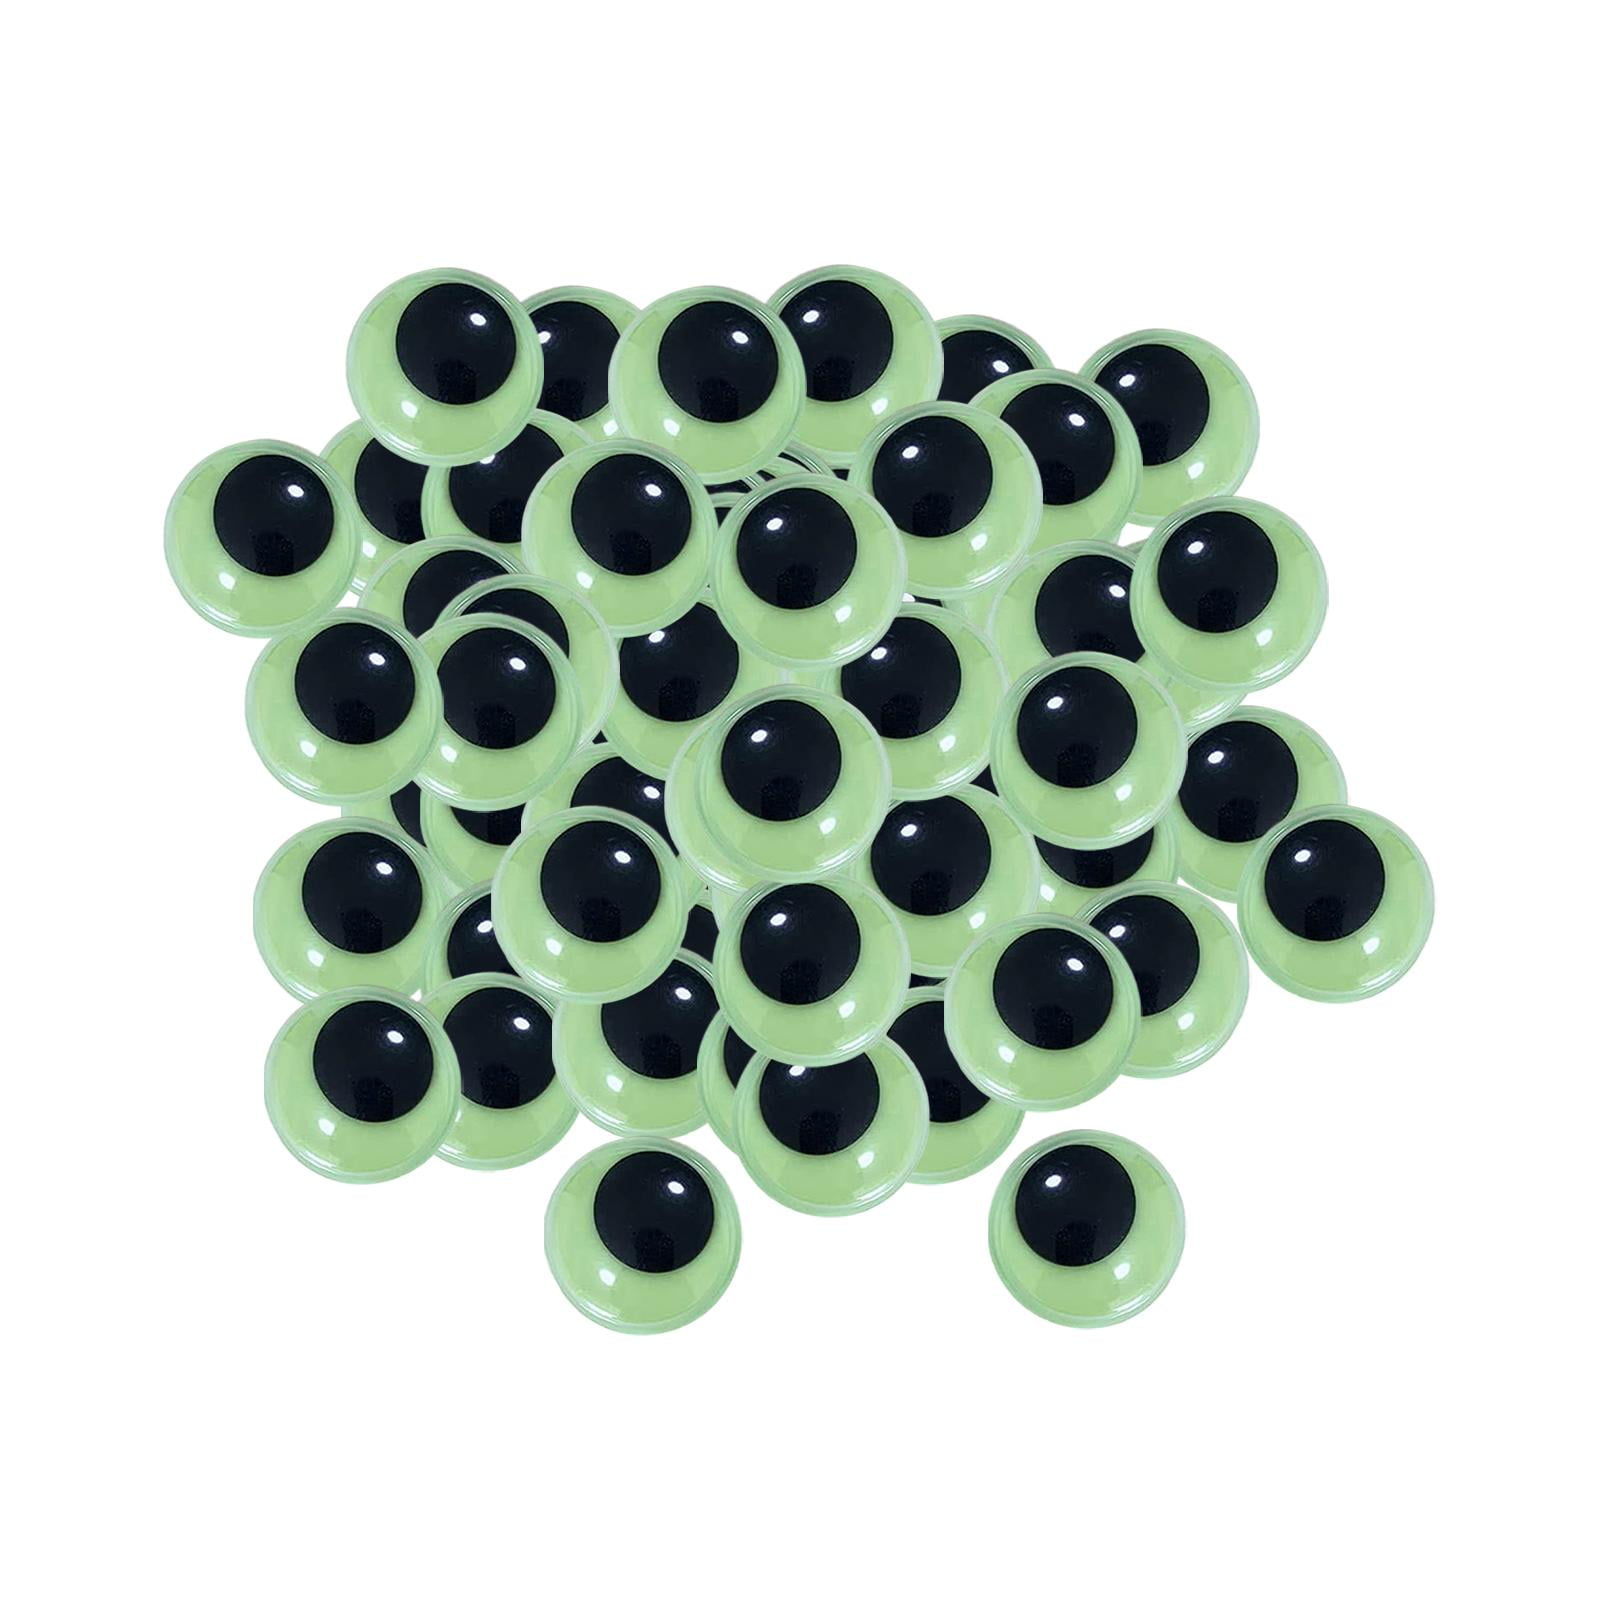 50pcs/100pcs Stick-On Wiggly Cute Big Eyes 6mm 10mm 15mm For Doll Making,  Diy Christmas Halloween Eye Stickers